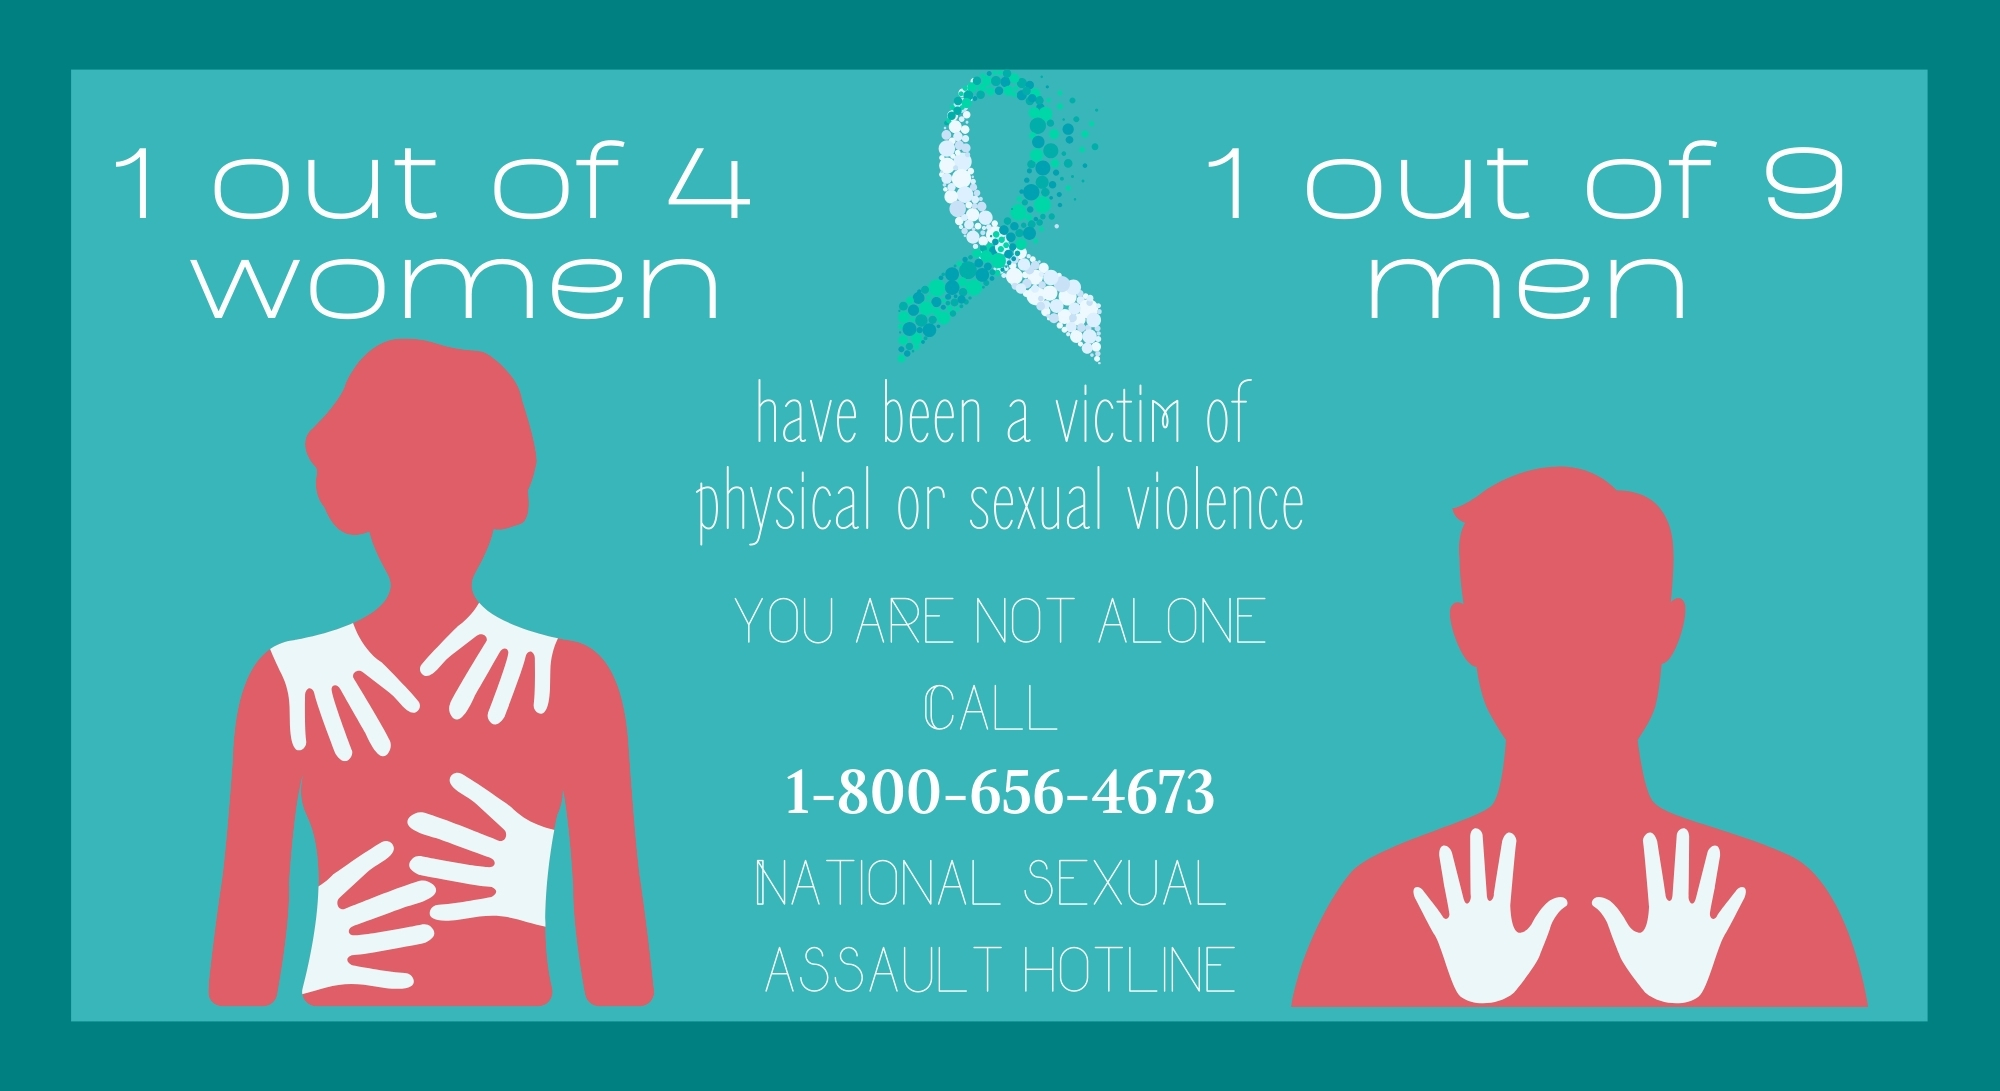 Take a stand against sexual assault with these resources